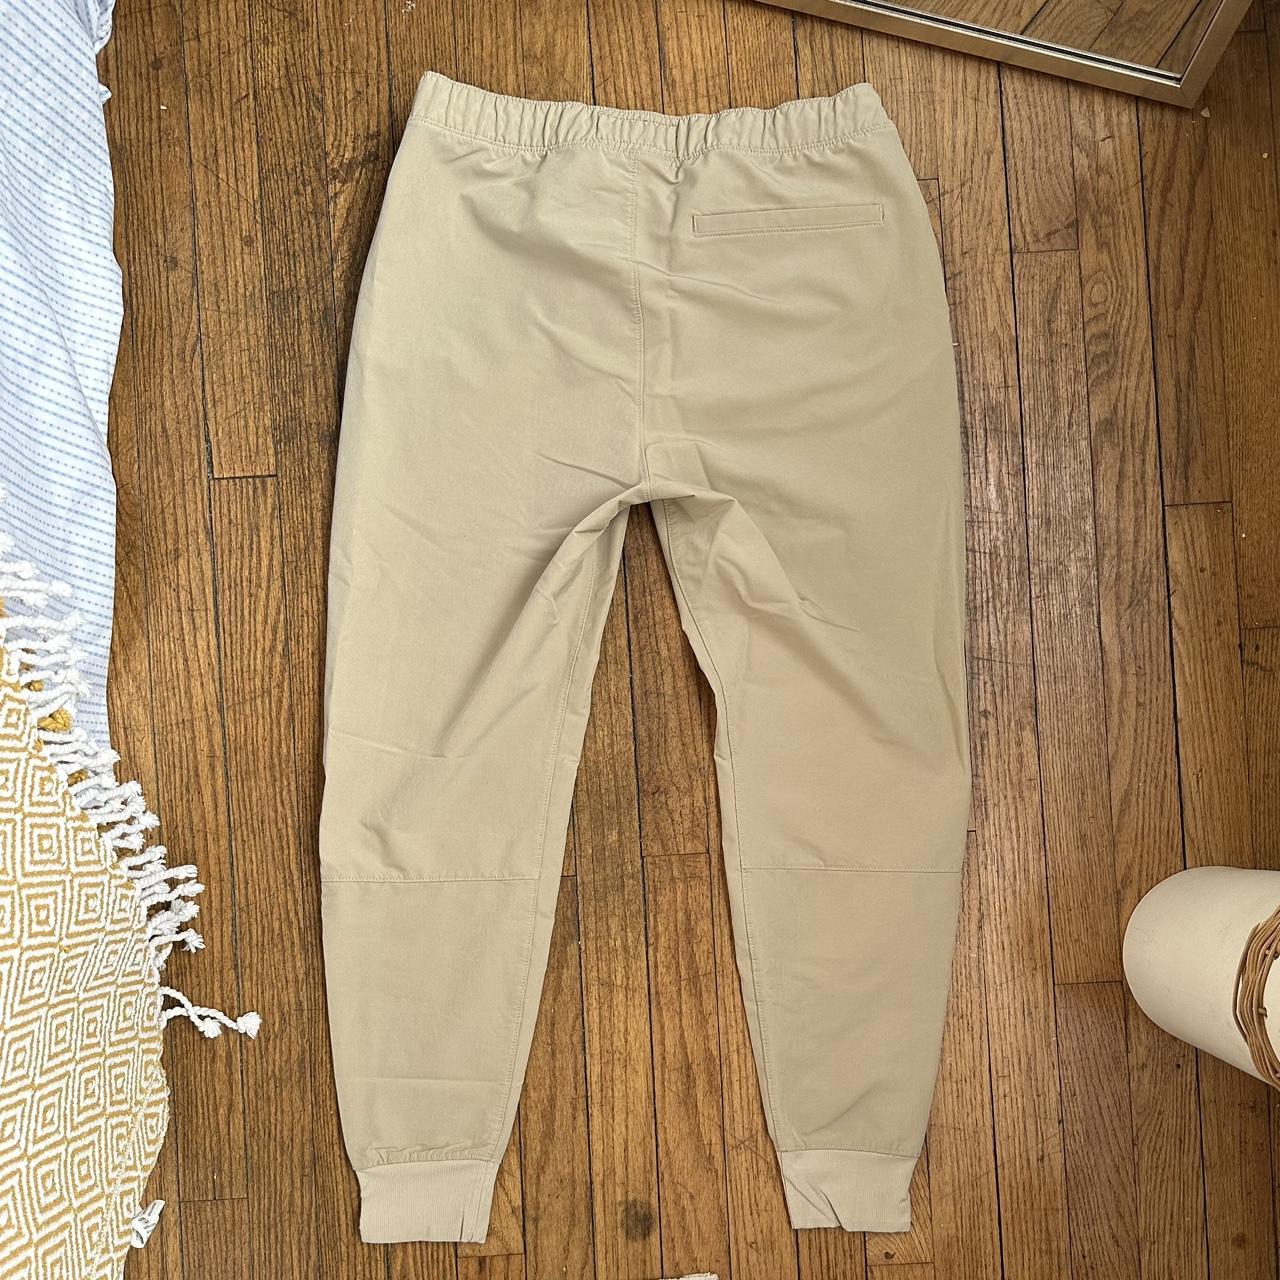 Abercrombie & Fitch Men's Tan and Cream Joggers-tracksuits | Depop